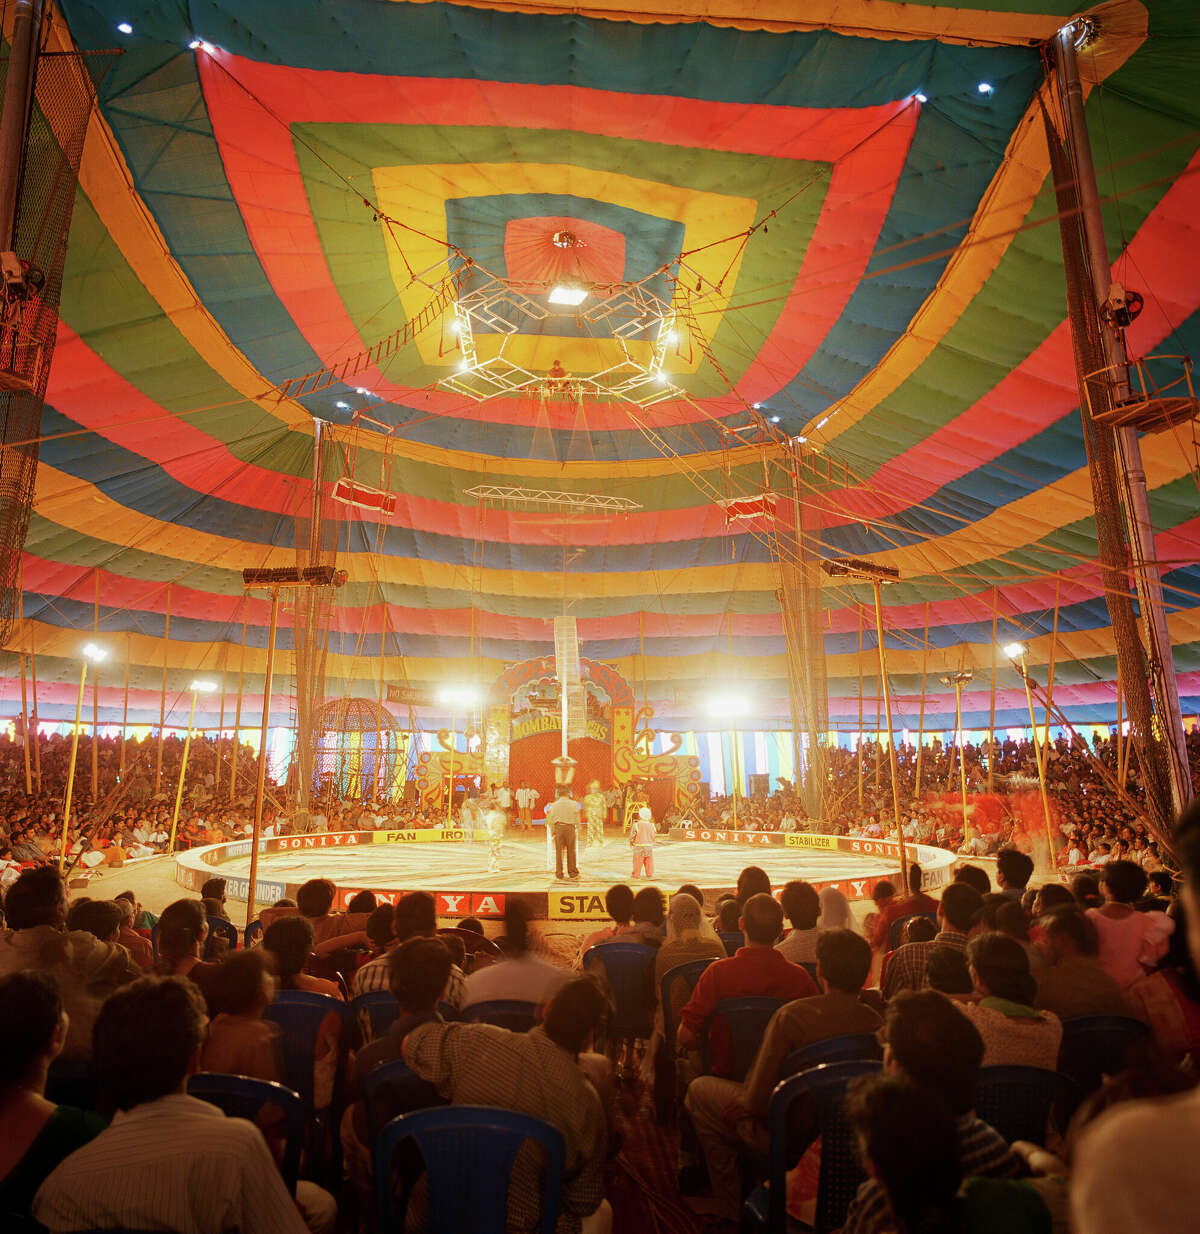 The Culpepper & Merriweather Circus will give two performances Aug. 18 in Ashland.